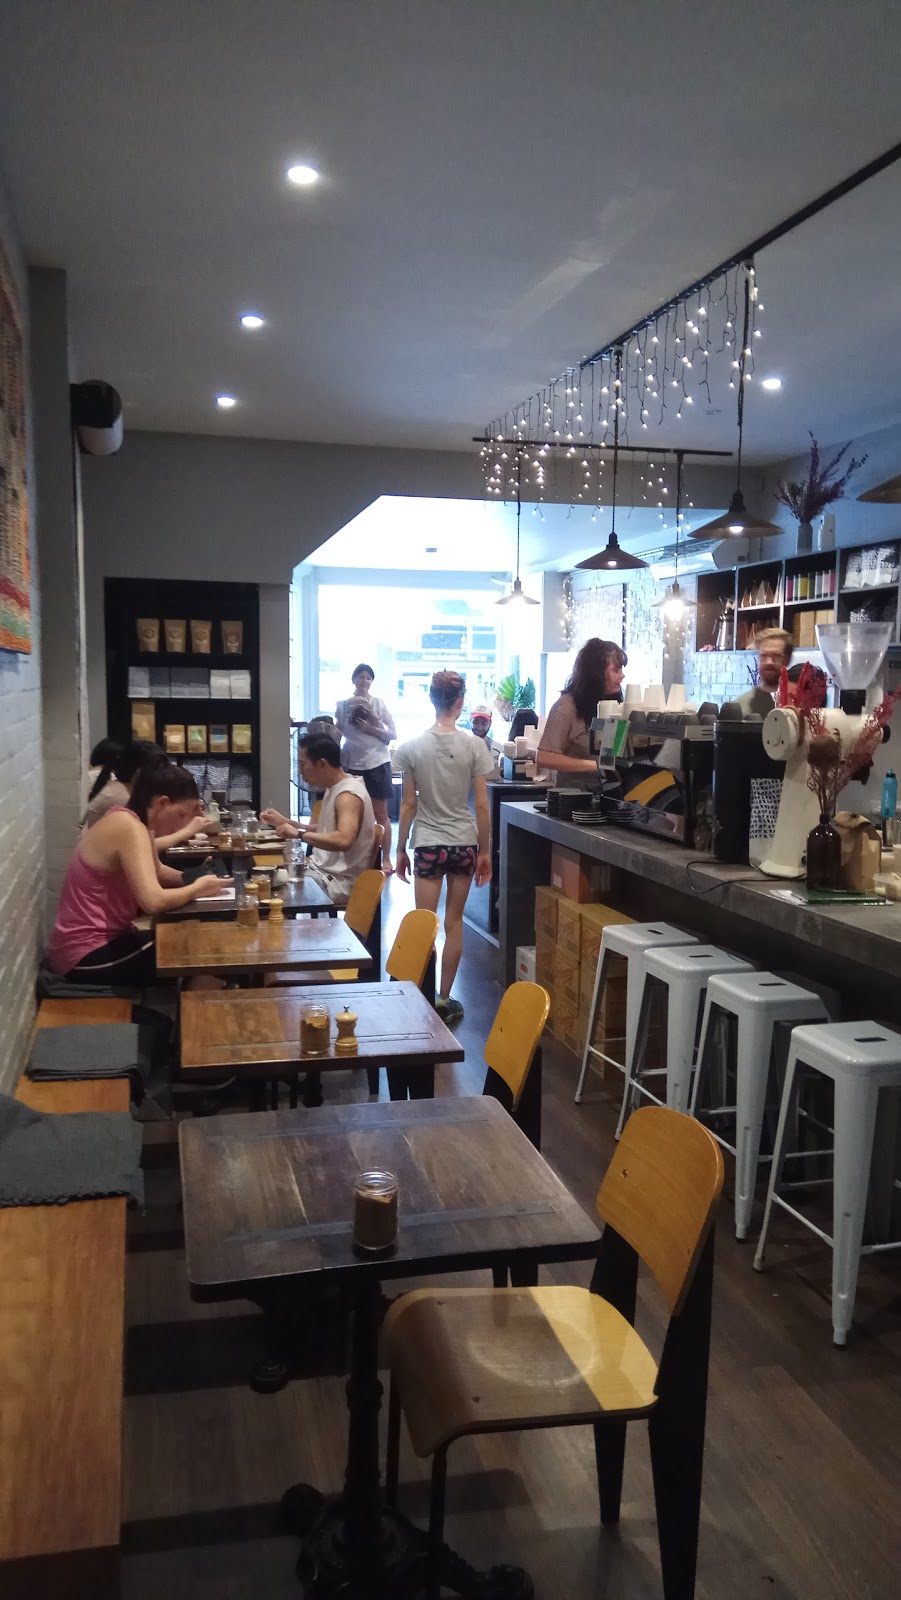 Heritage Coffee Brewers | cafe | 1A Lackey St, Summer Hill NSW 2130, Australia | 0285427075 OR +61 2 8542 7075